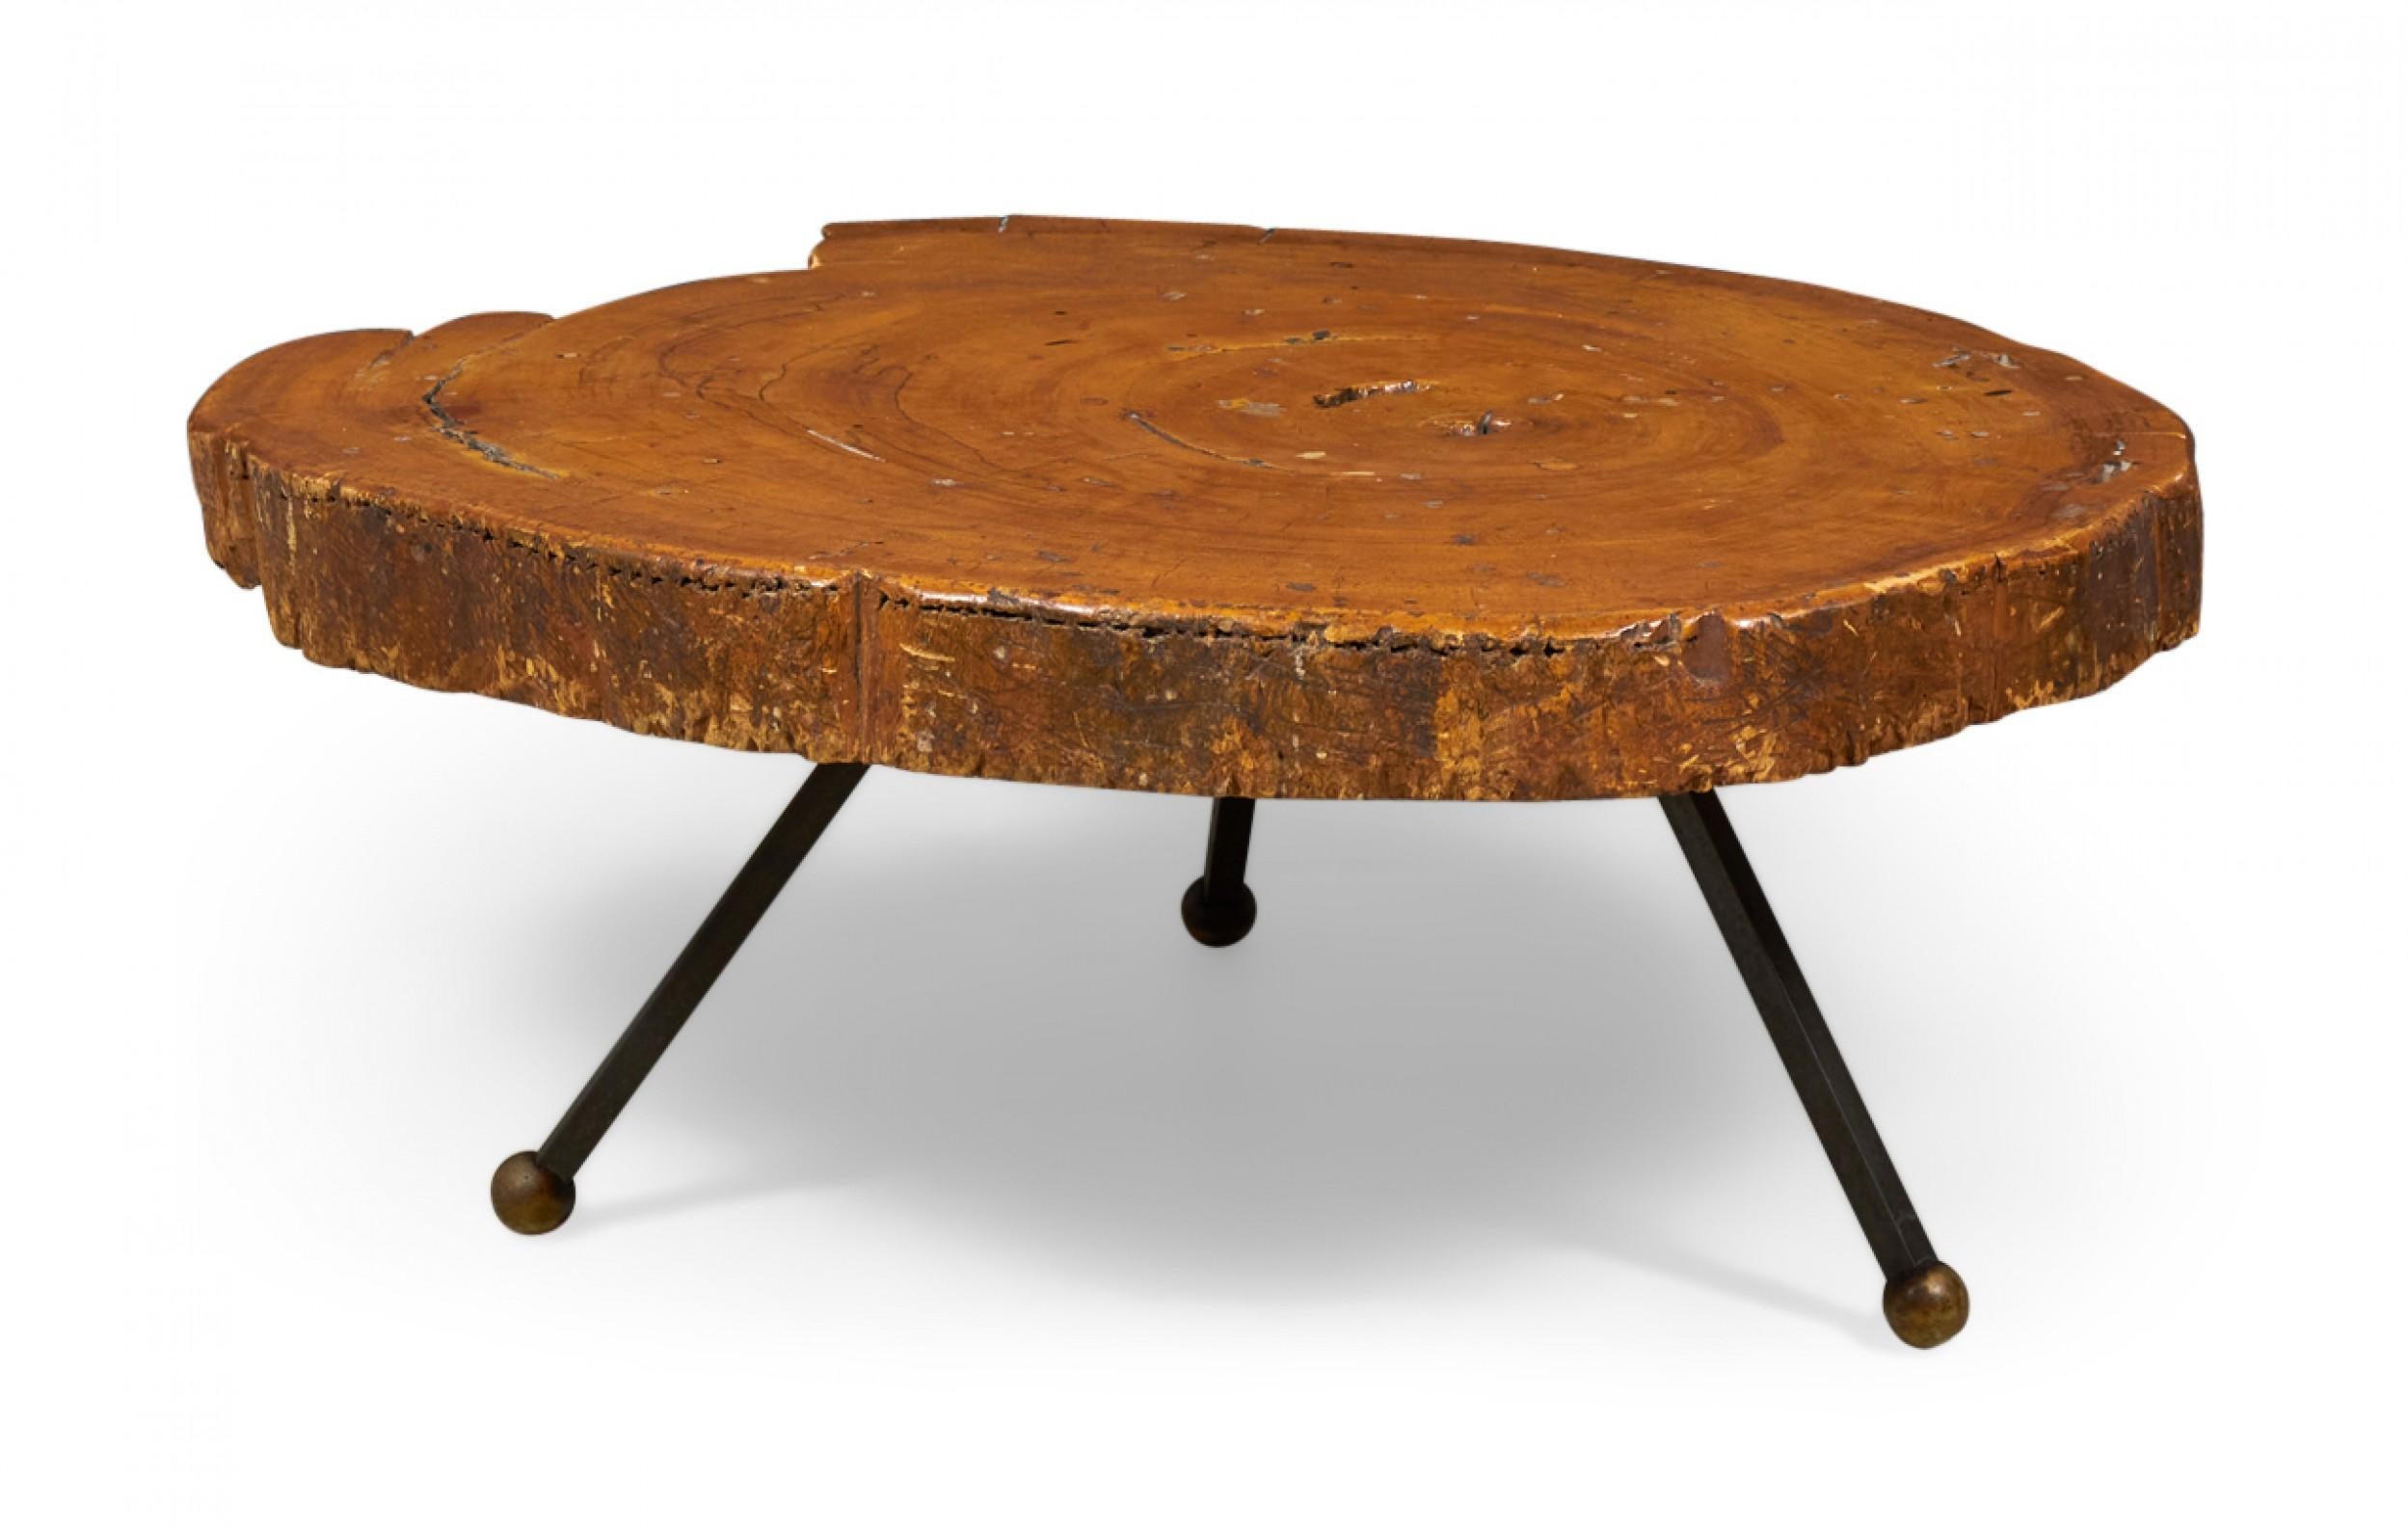 Mexican Modern coffee table with a sabino wood top with natural free edge supported on three angled wrought iron legs ending in bronze ball feet.